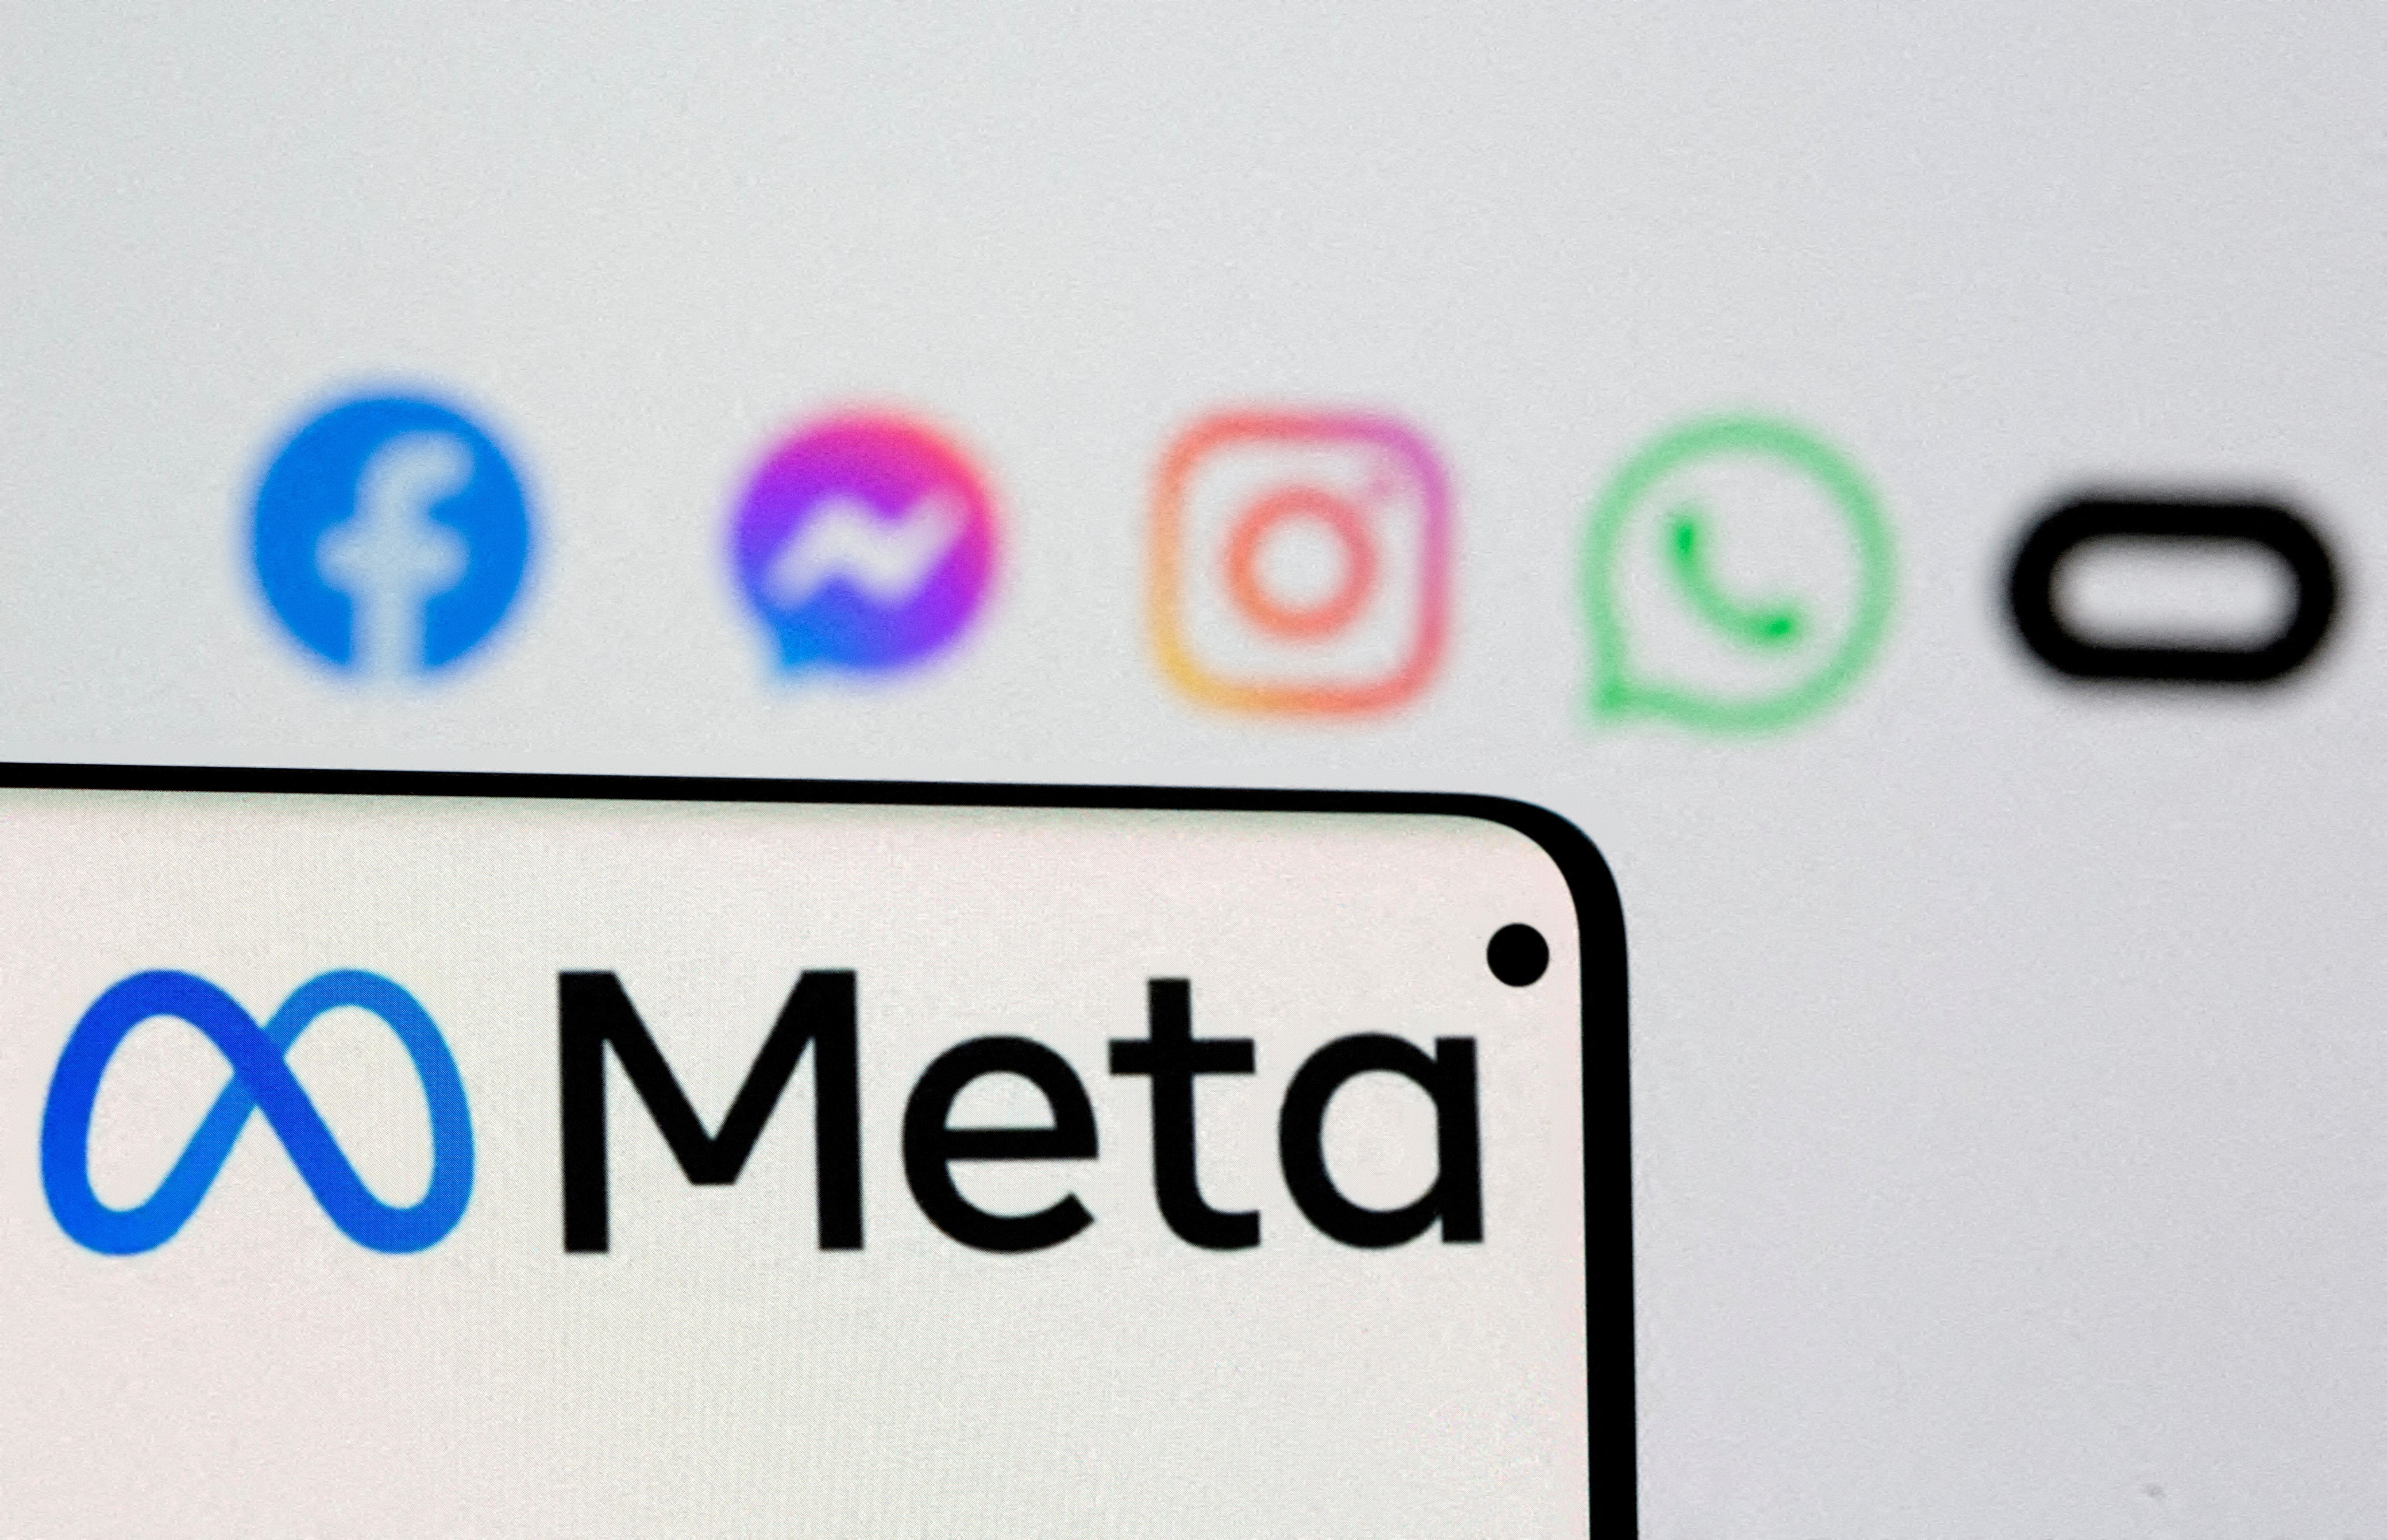 Meta has introduced an artificial intelligence (AI) assistant and glasses for streaming on Facebook